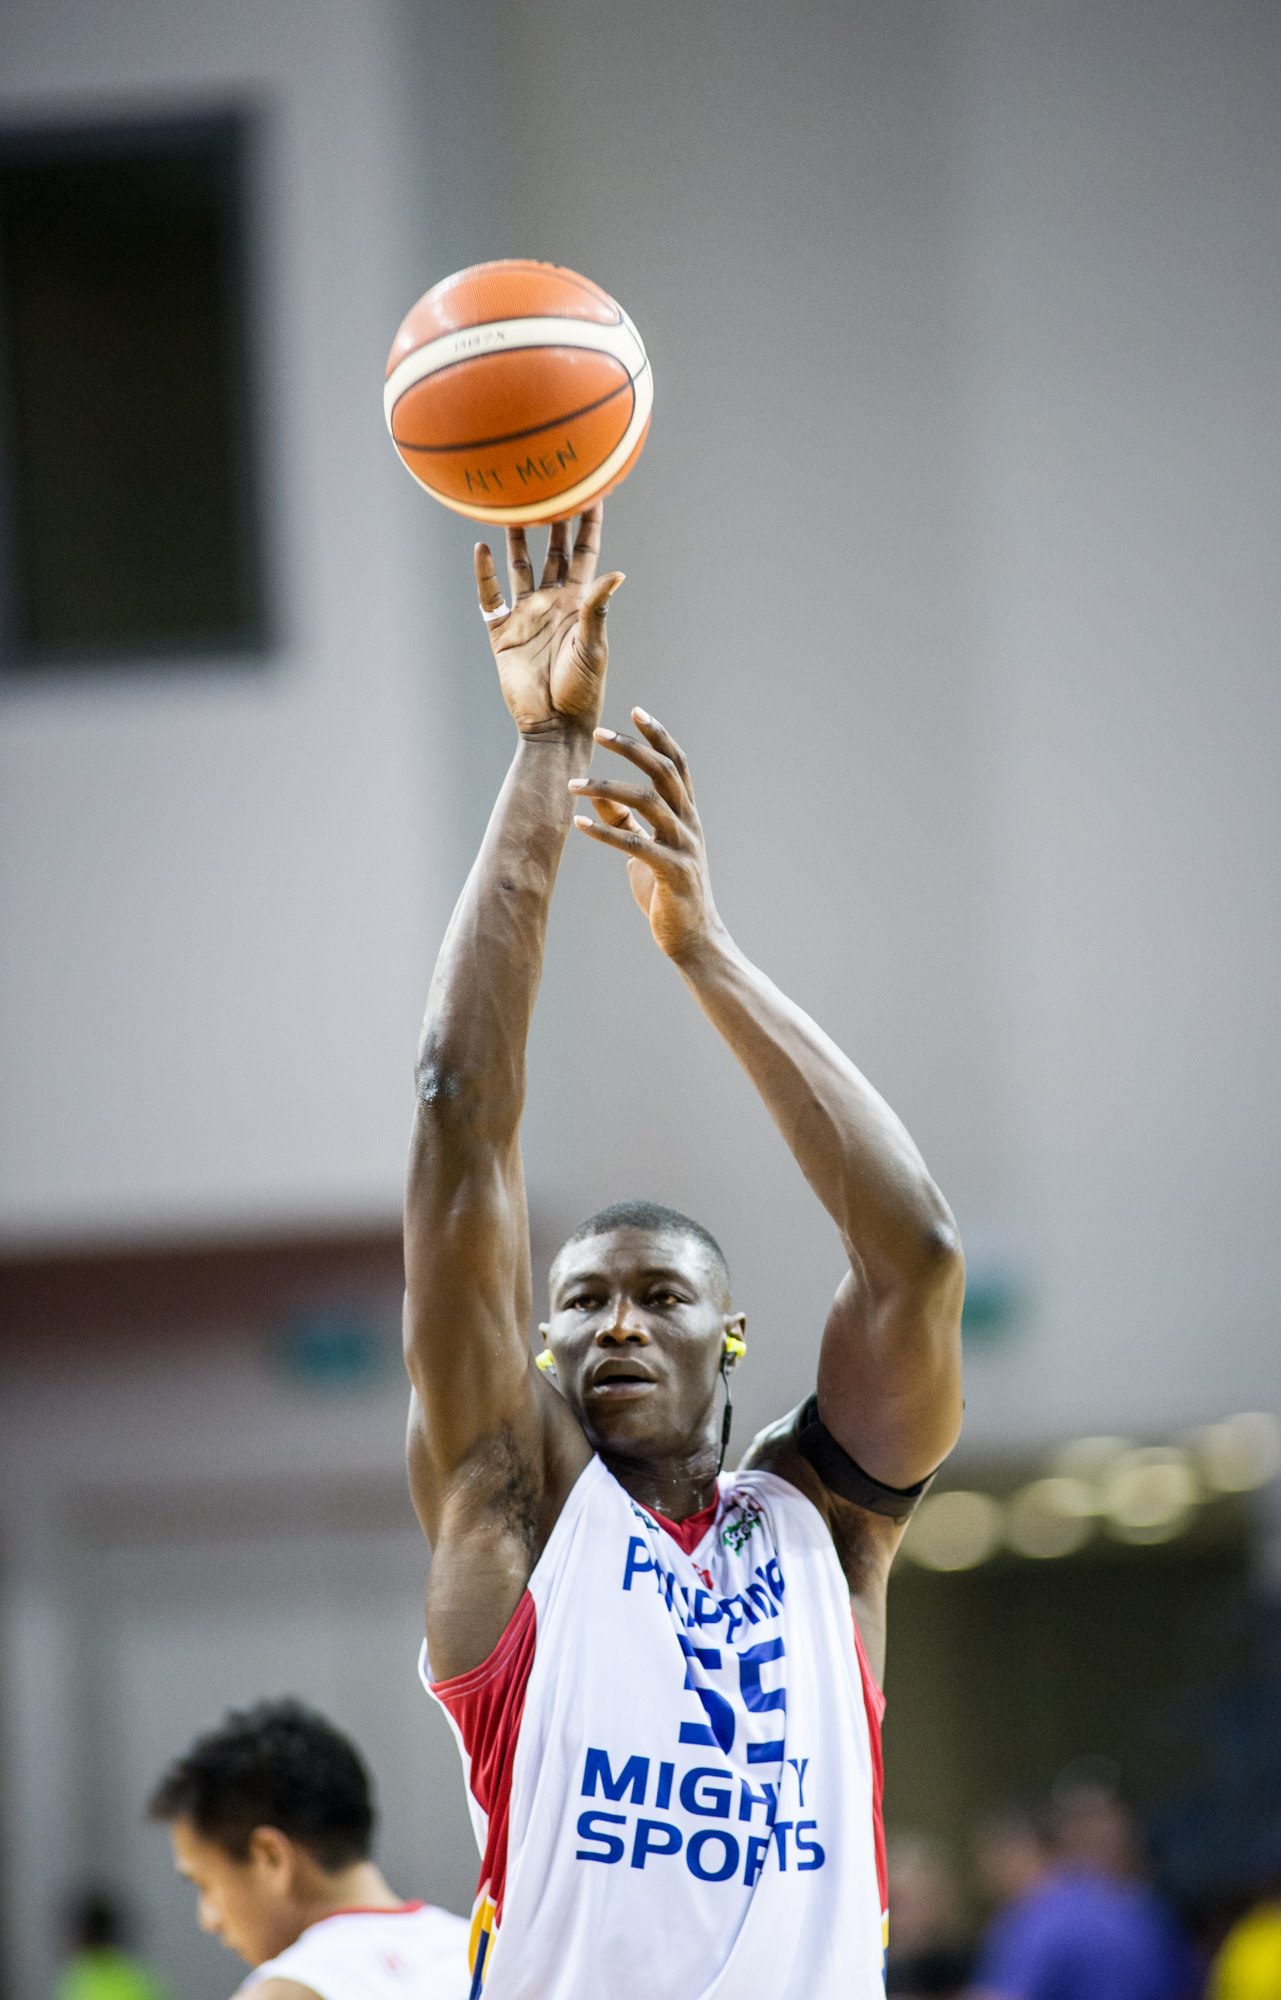 A Phillipines player takes a shot in warm up during the Merlion Cup basketball competition at the OCBC Arena.